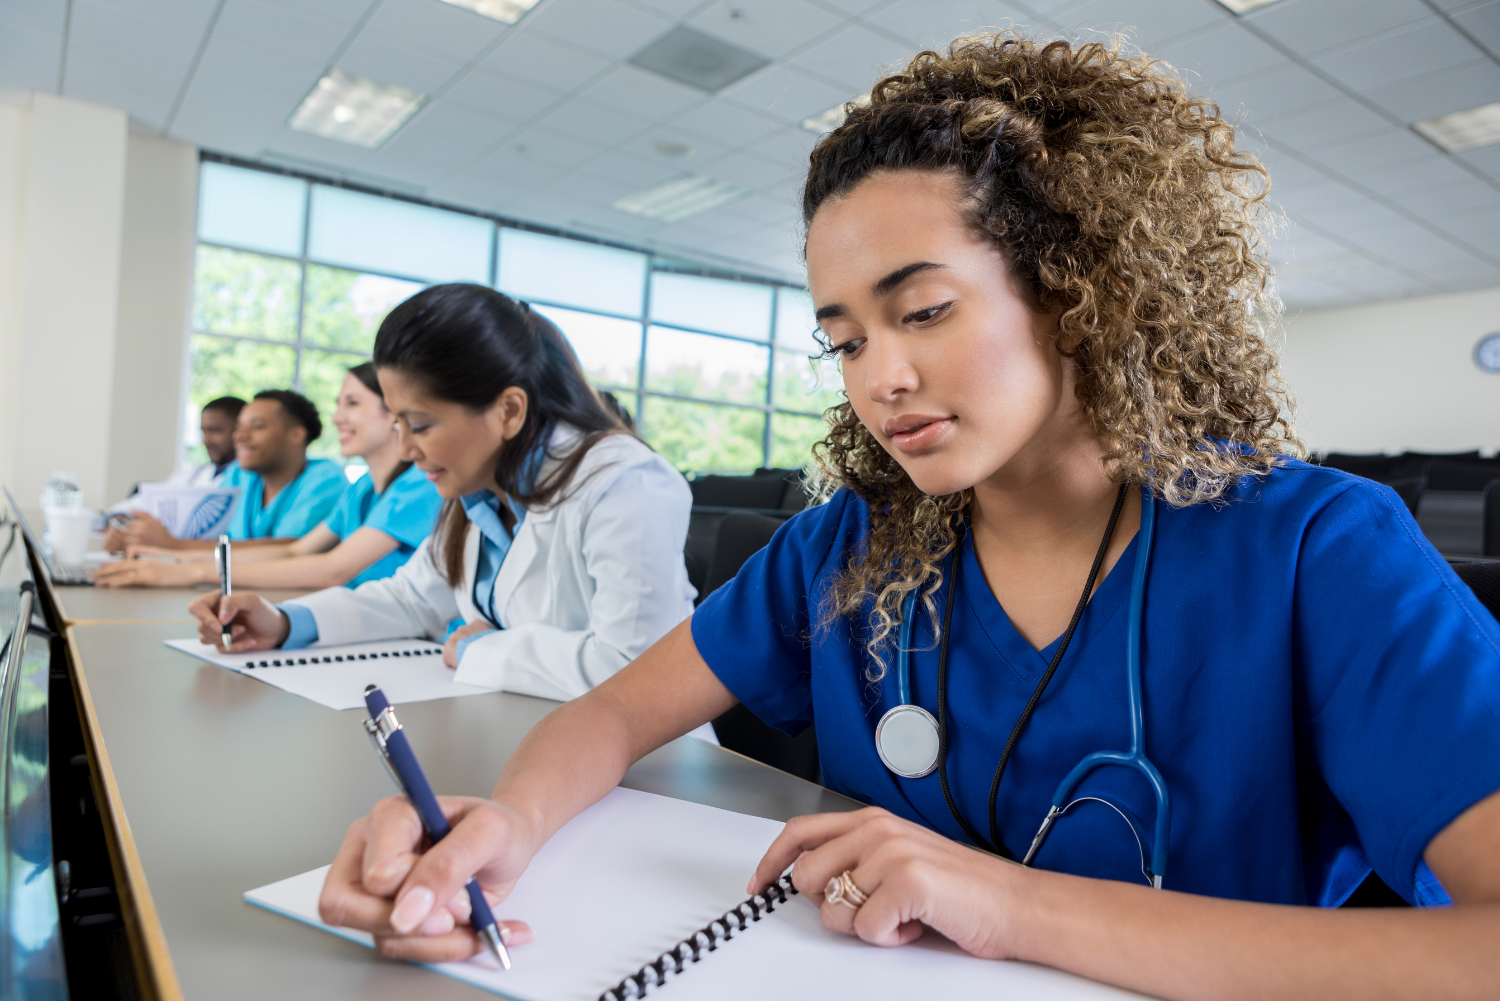 Dismissal for Academic Dishonesty: What Nursing Students Can Do to Safeguard Themselves